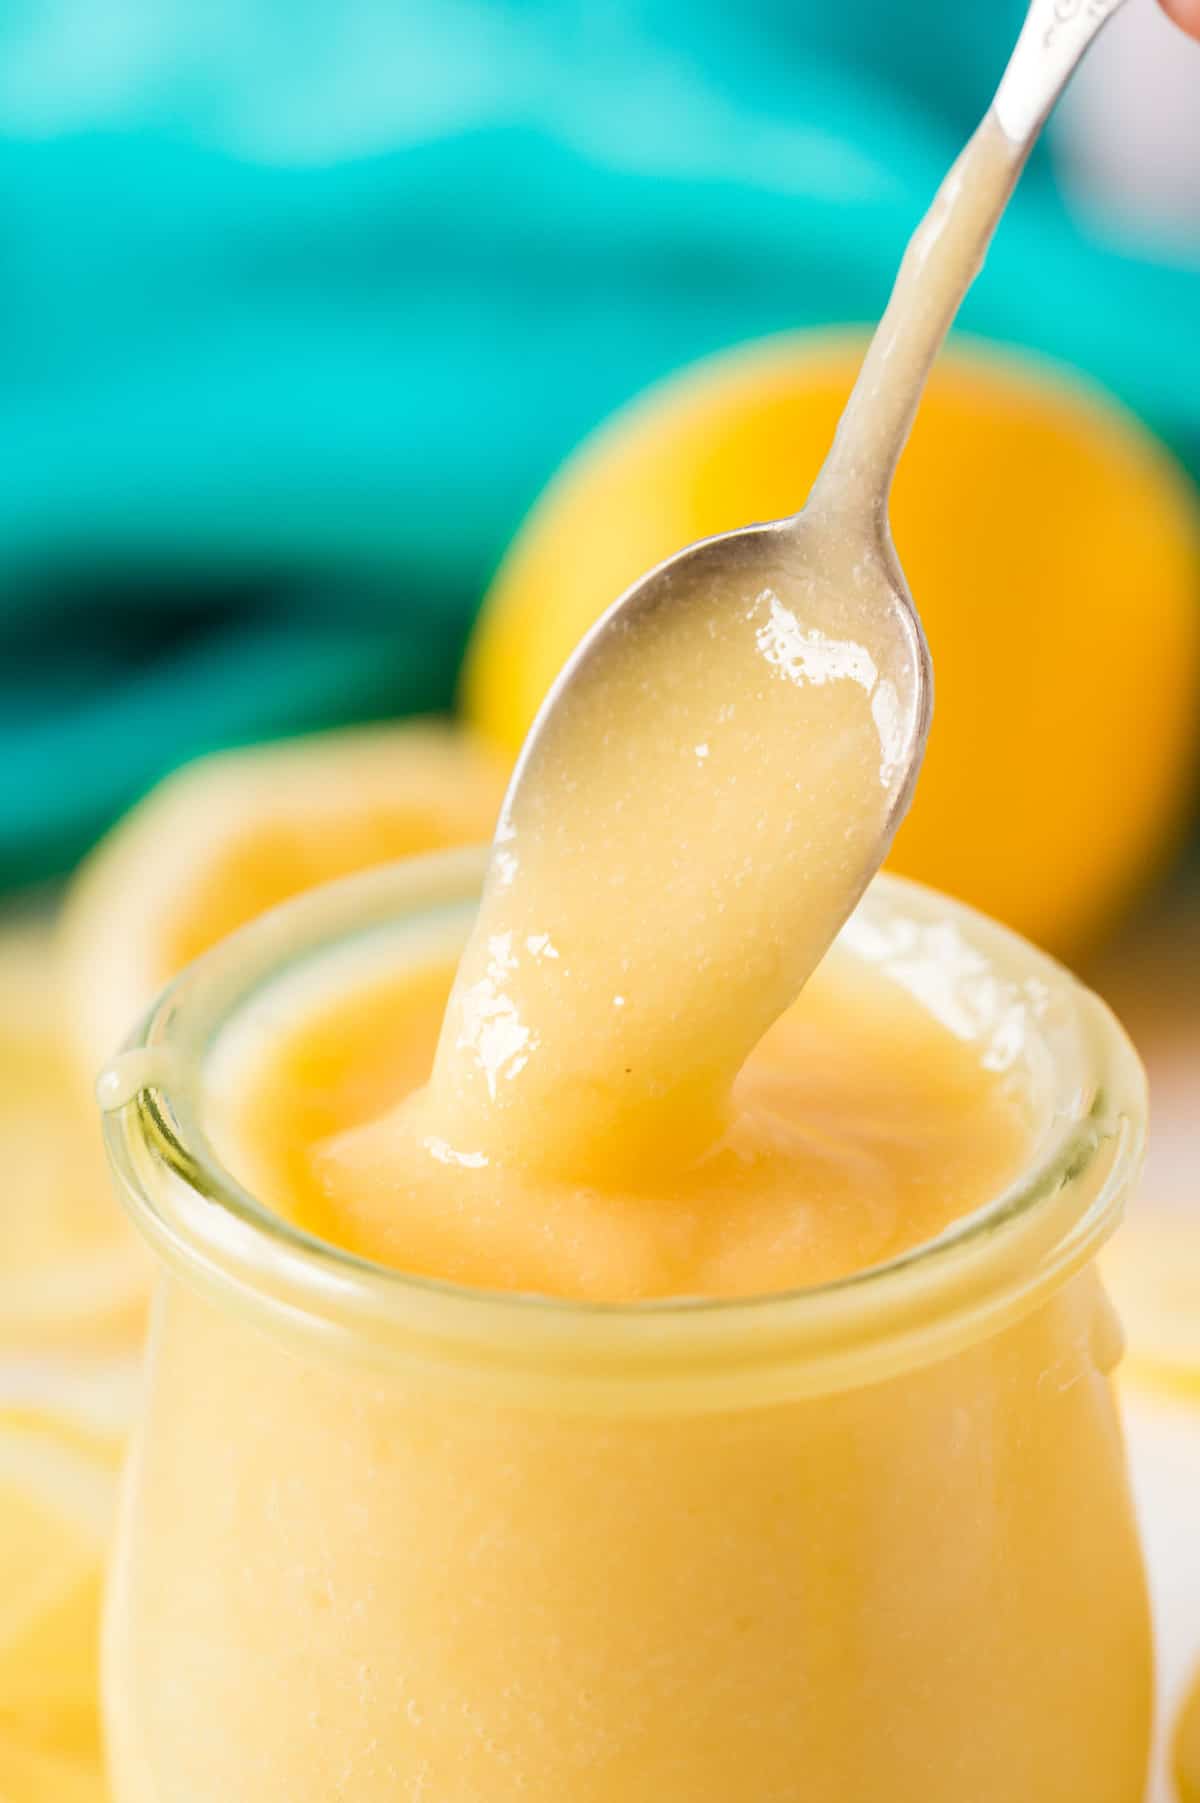 Spoon showing texture of lemon curd.